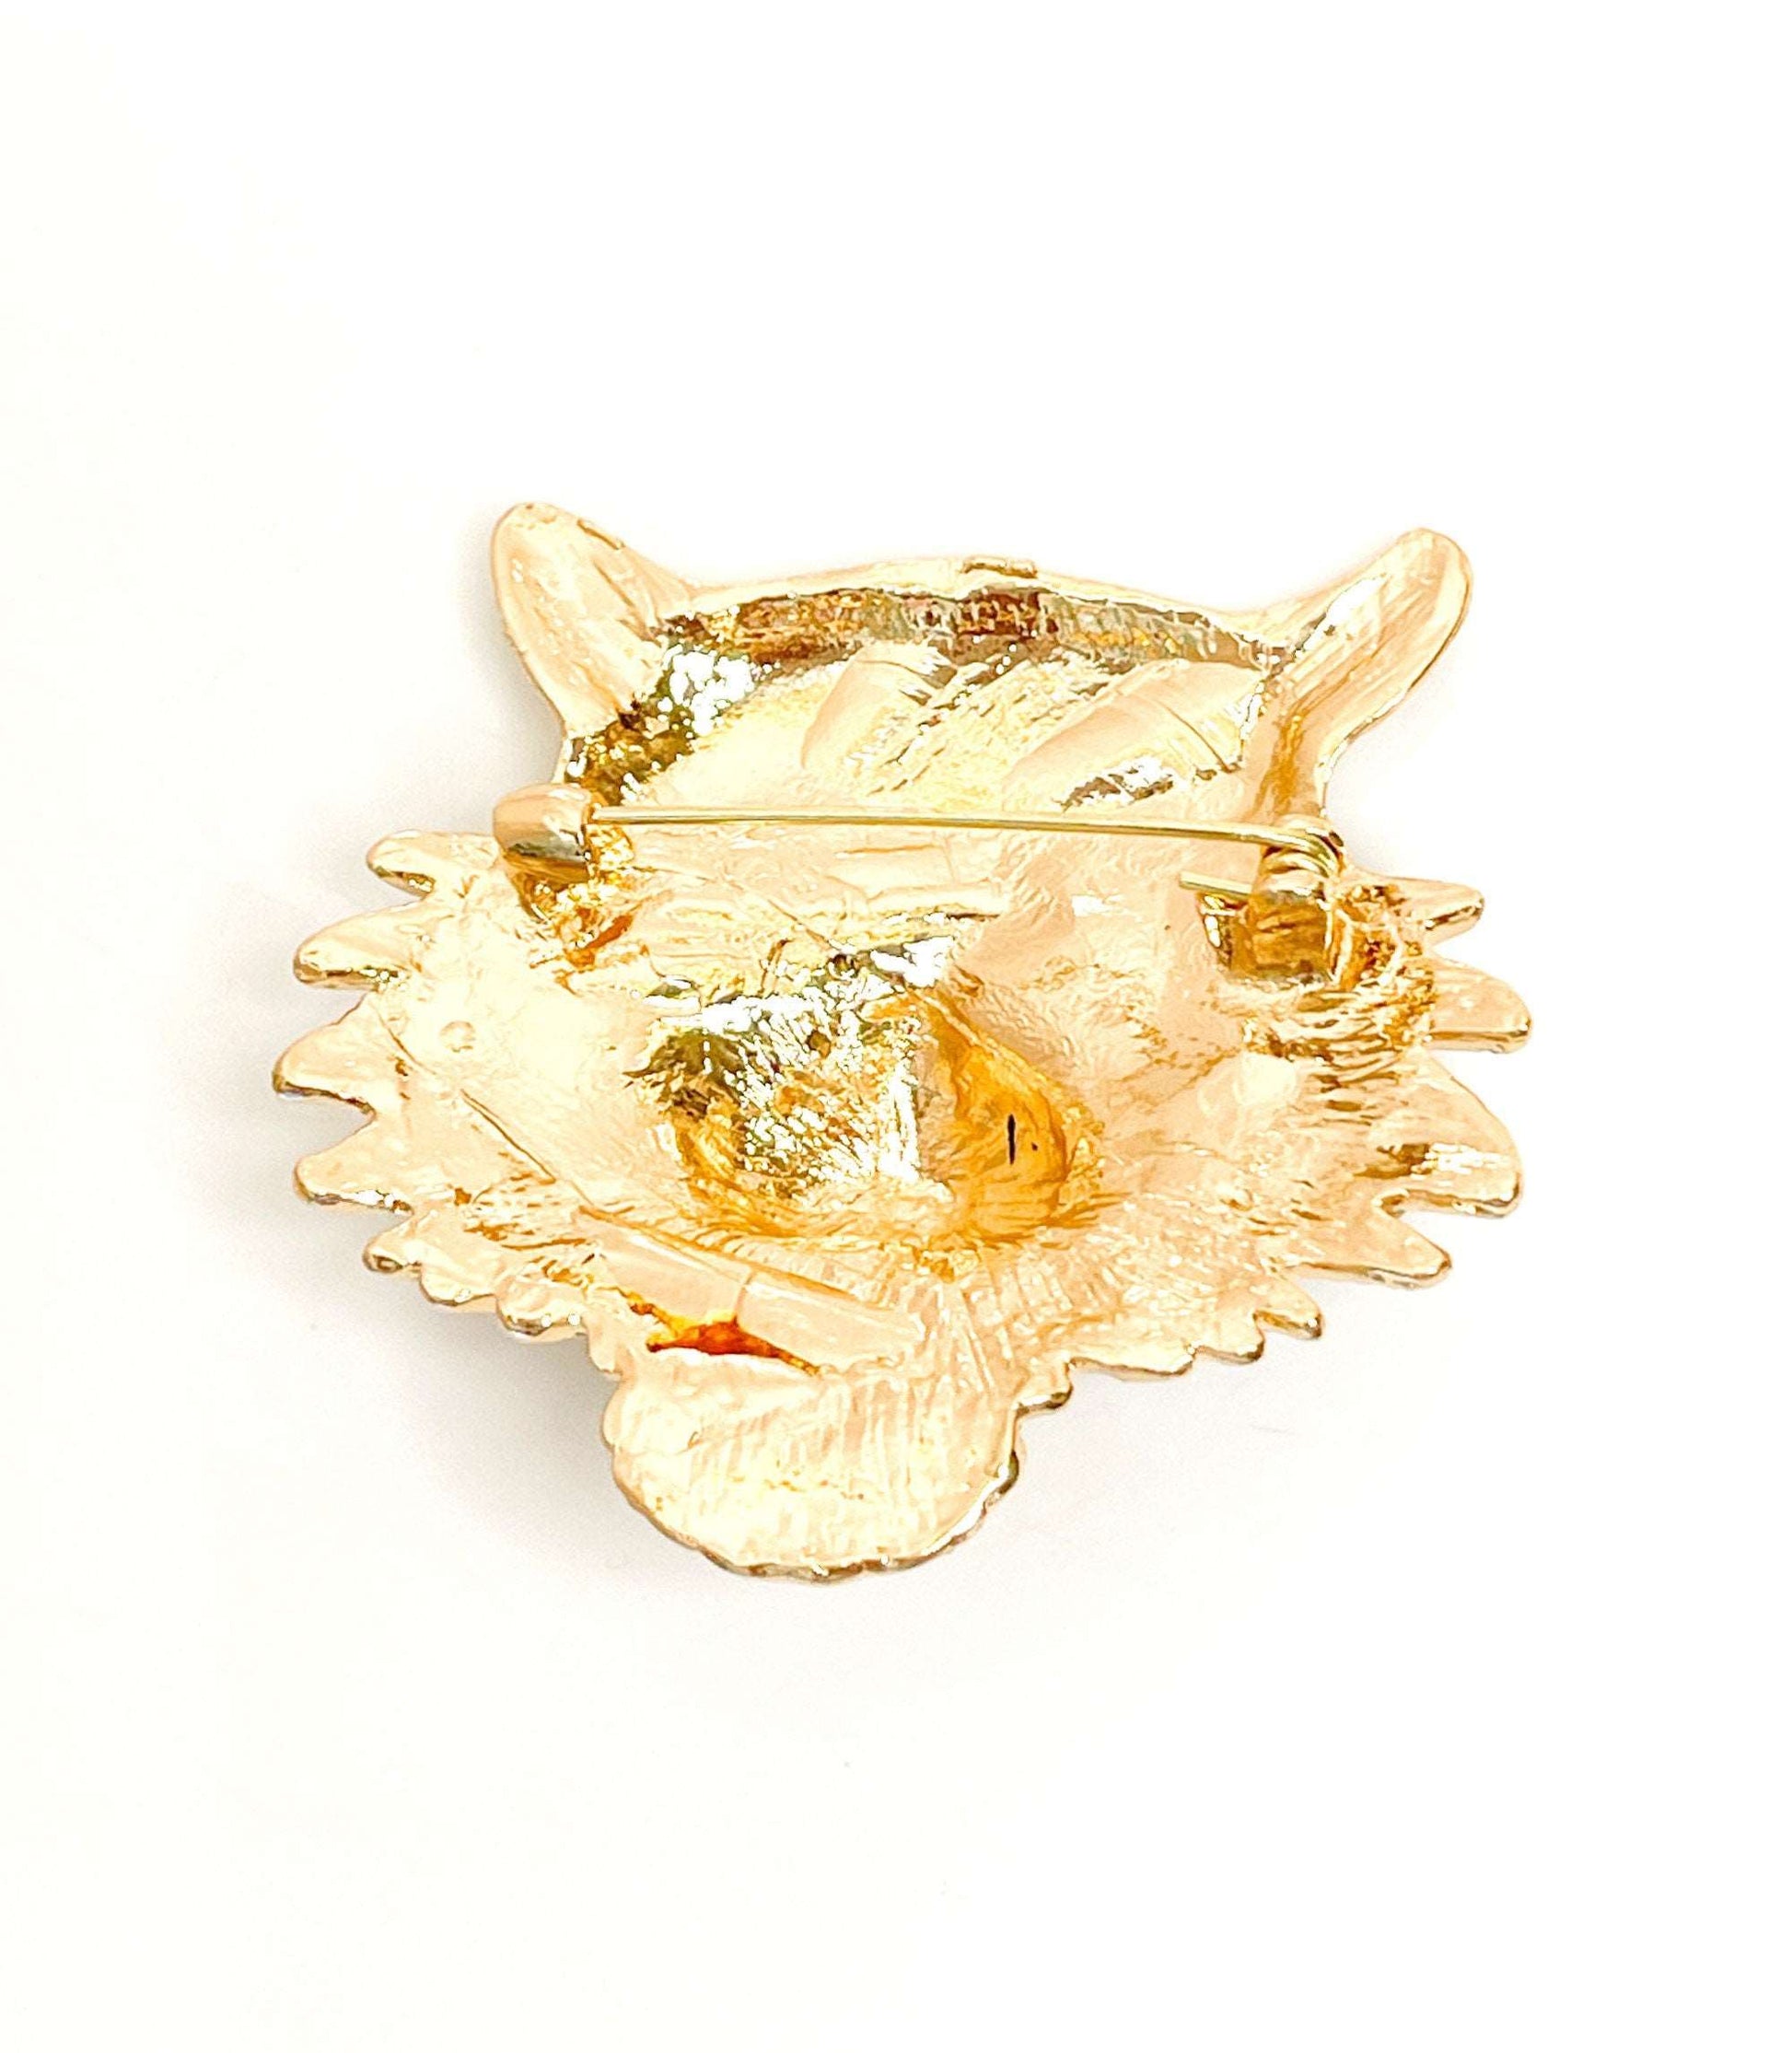 Large Crystal Roaring Tiger Brooch, Sparkly Tiger Head Pin, Crystal Animal Pin, Art Deco Diamonte Pin, Brooches For Women